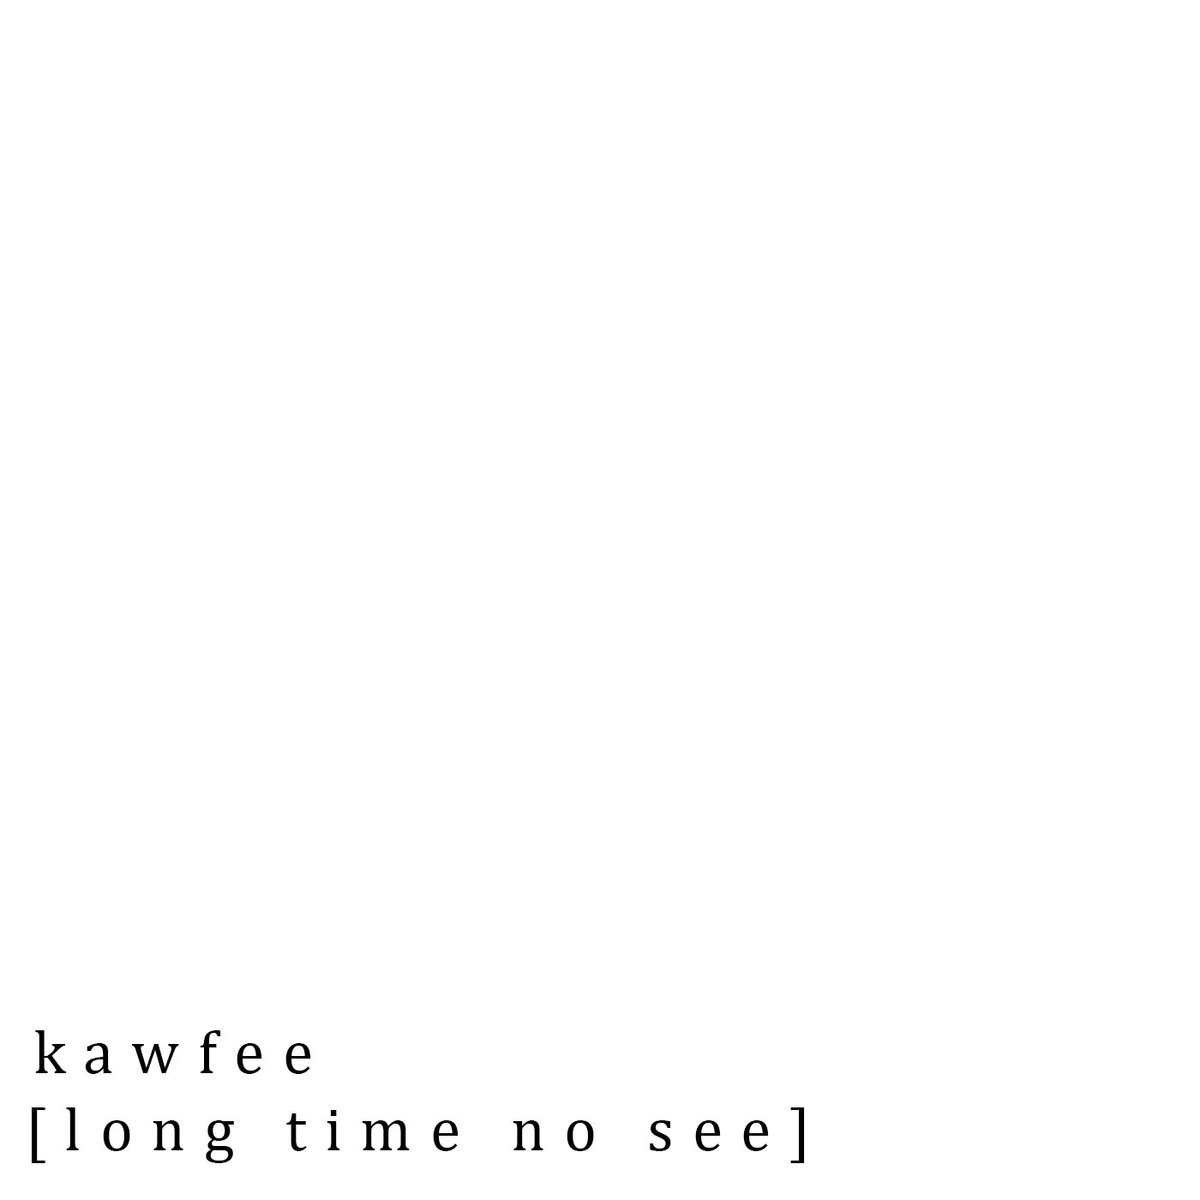 Kawfee - "[long time no see]" (Release)